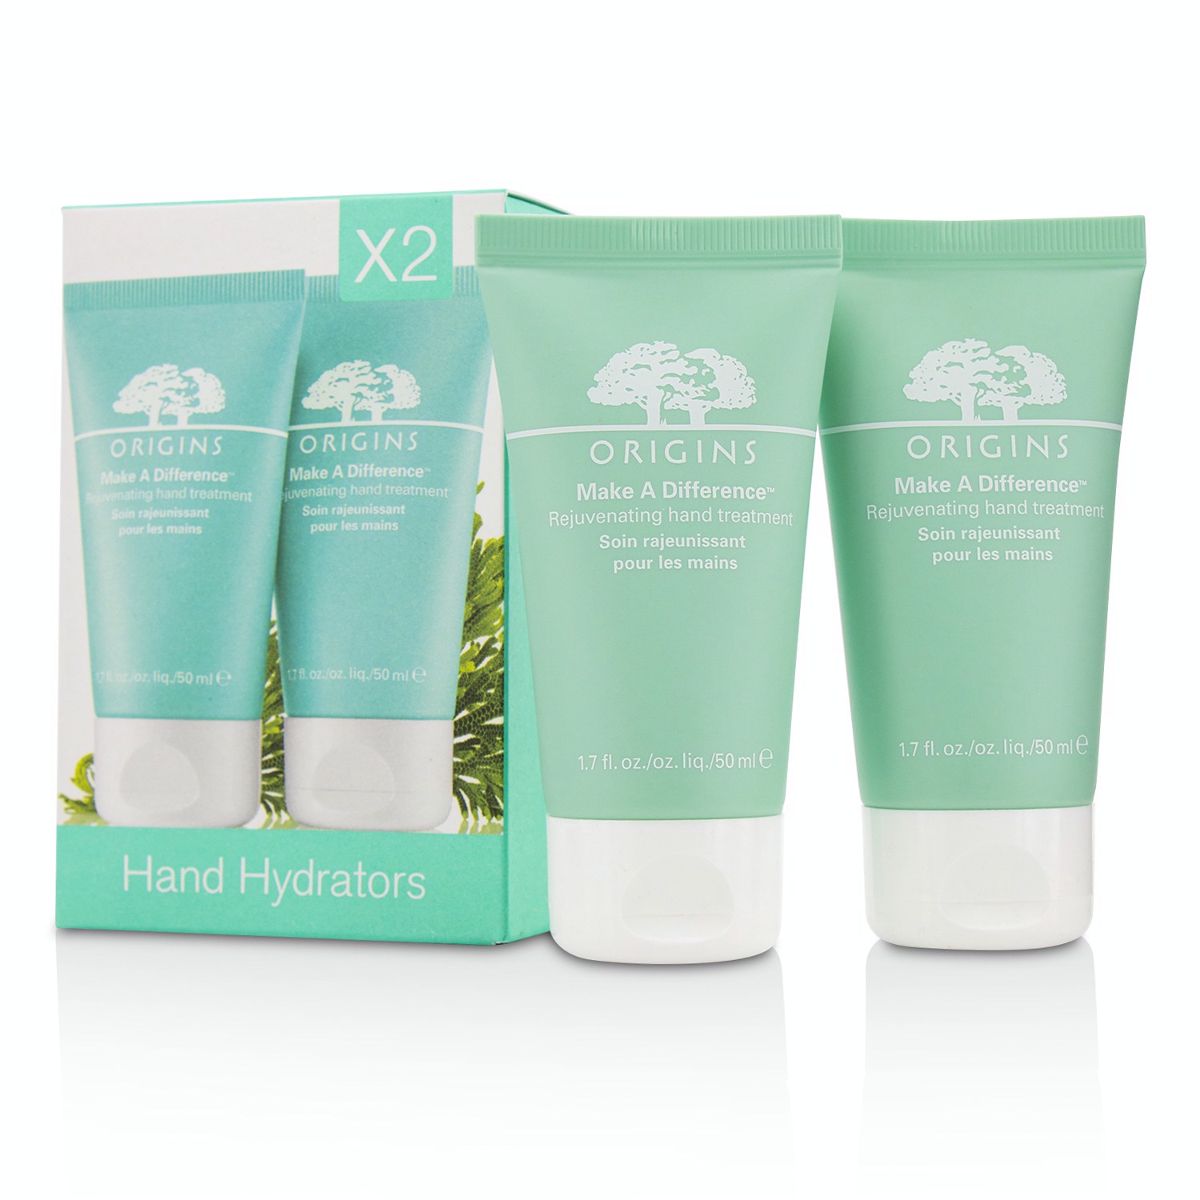 Make A Difference Rejuvenating Hand Treatment Duo Origins Image